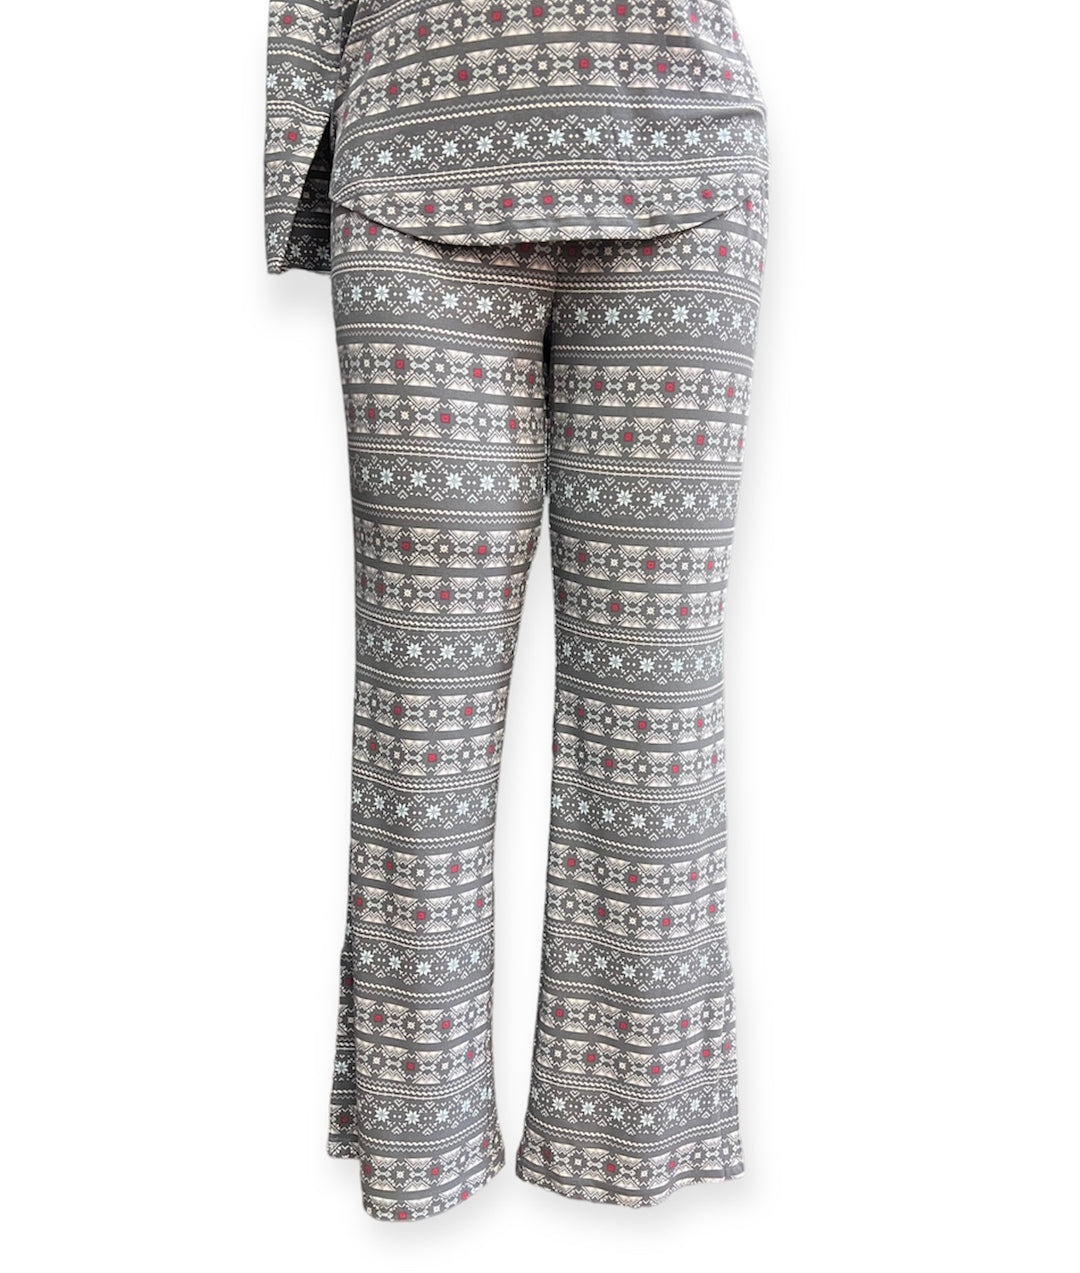 "Just Being Me" PJ Pant w/ Side Seam Opening